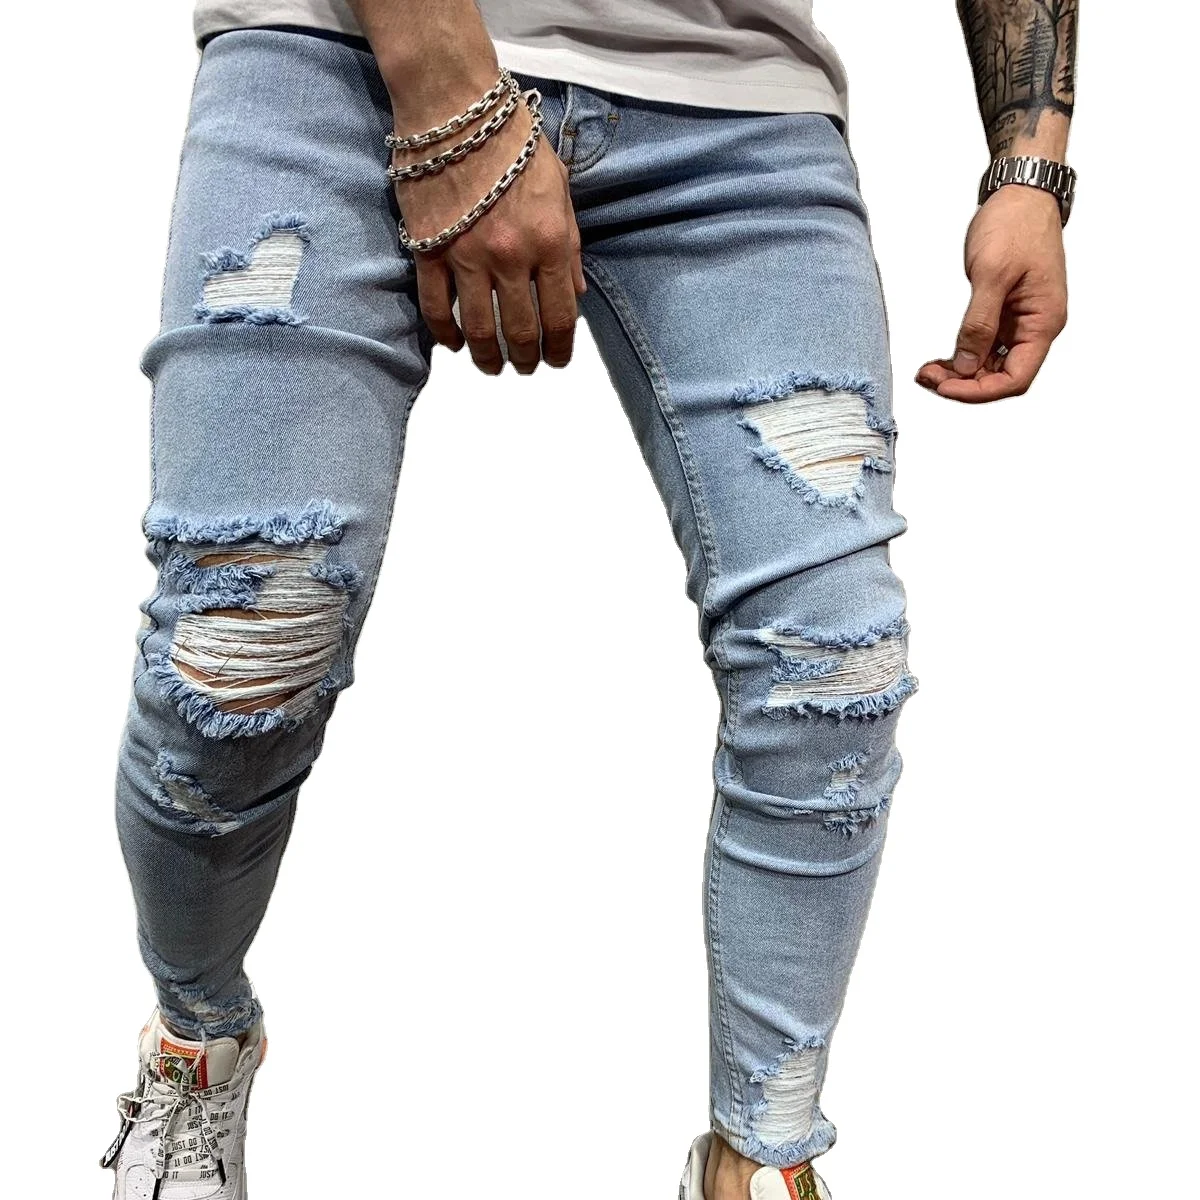 

APOLLO Custom Low Price Stylish Slim Fit Pants Hole Distressed Trousers Frayed Ripped Denim Men's Jeans